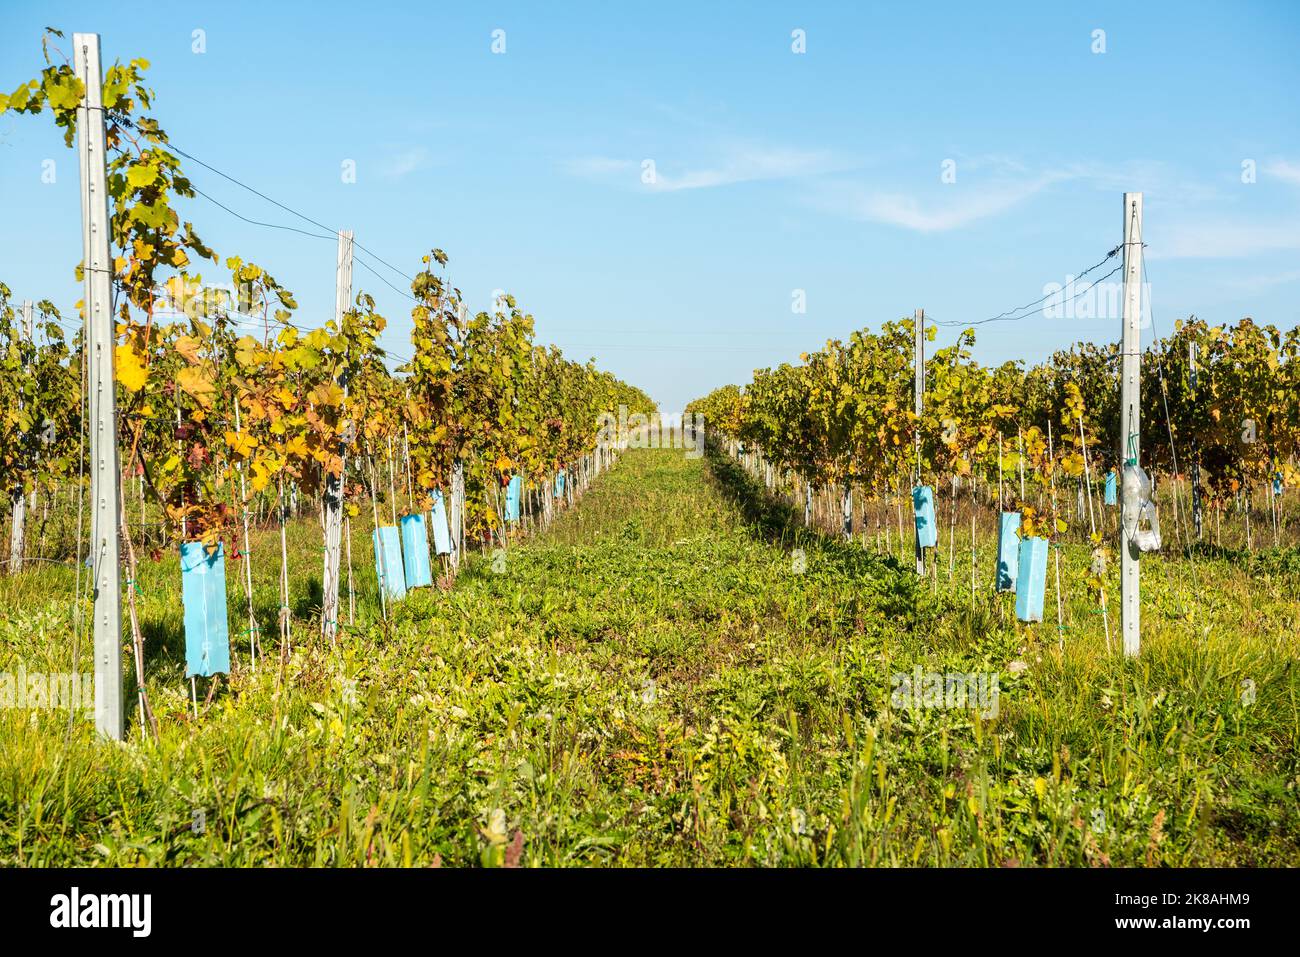 Vineyard in Eger, Hungary. The Eger wine region is famous for its red blend, Egri Bikaver and for some whites like Egri Leanyka, Debroi Harslevelu or Stock Photo